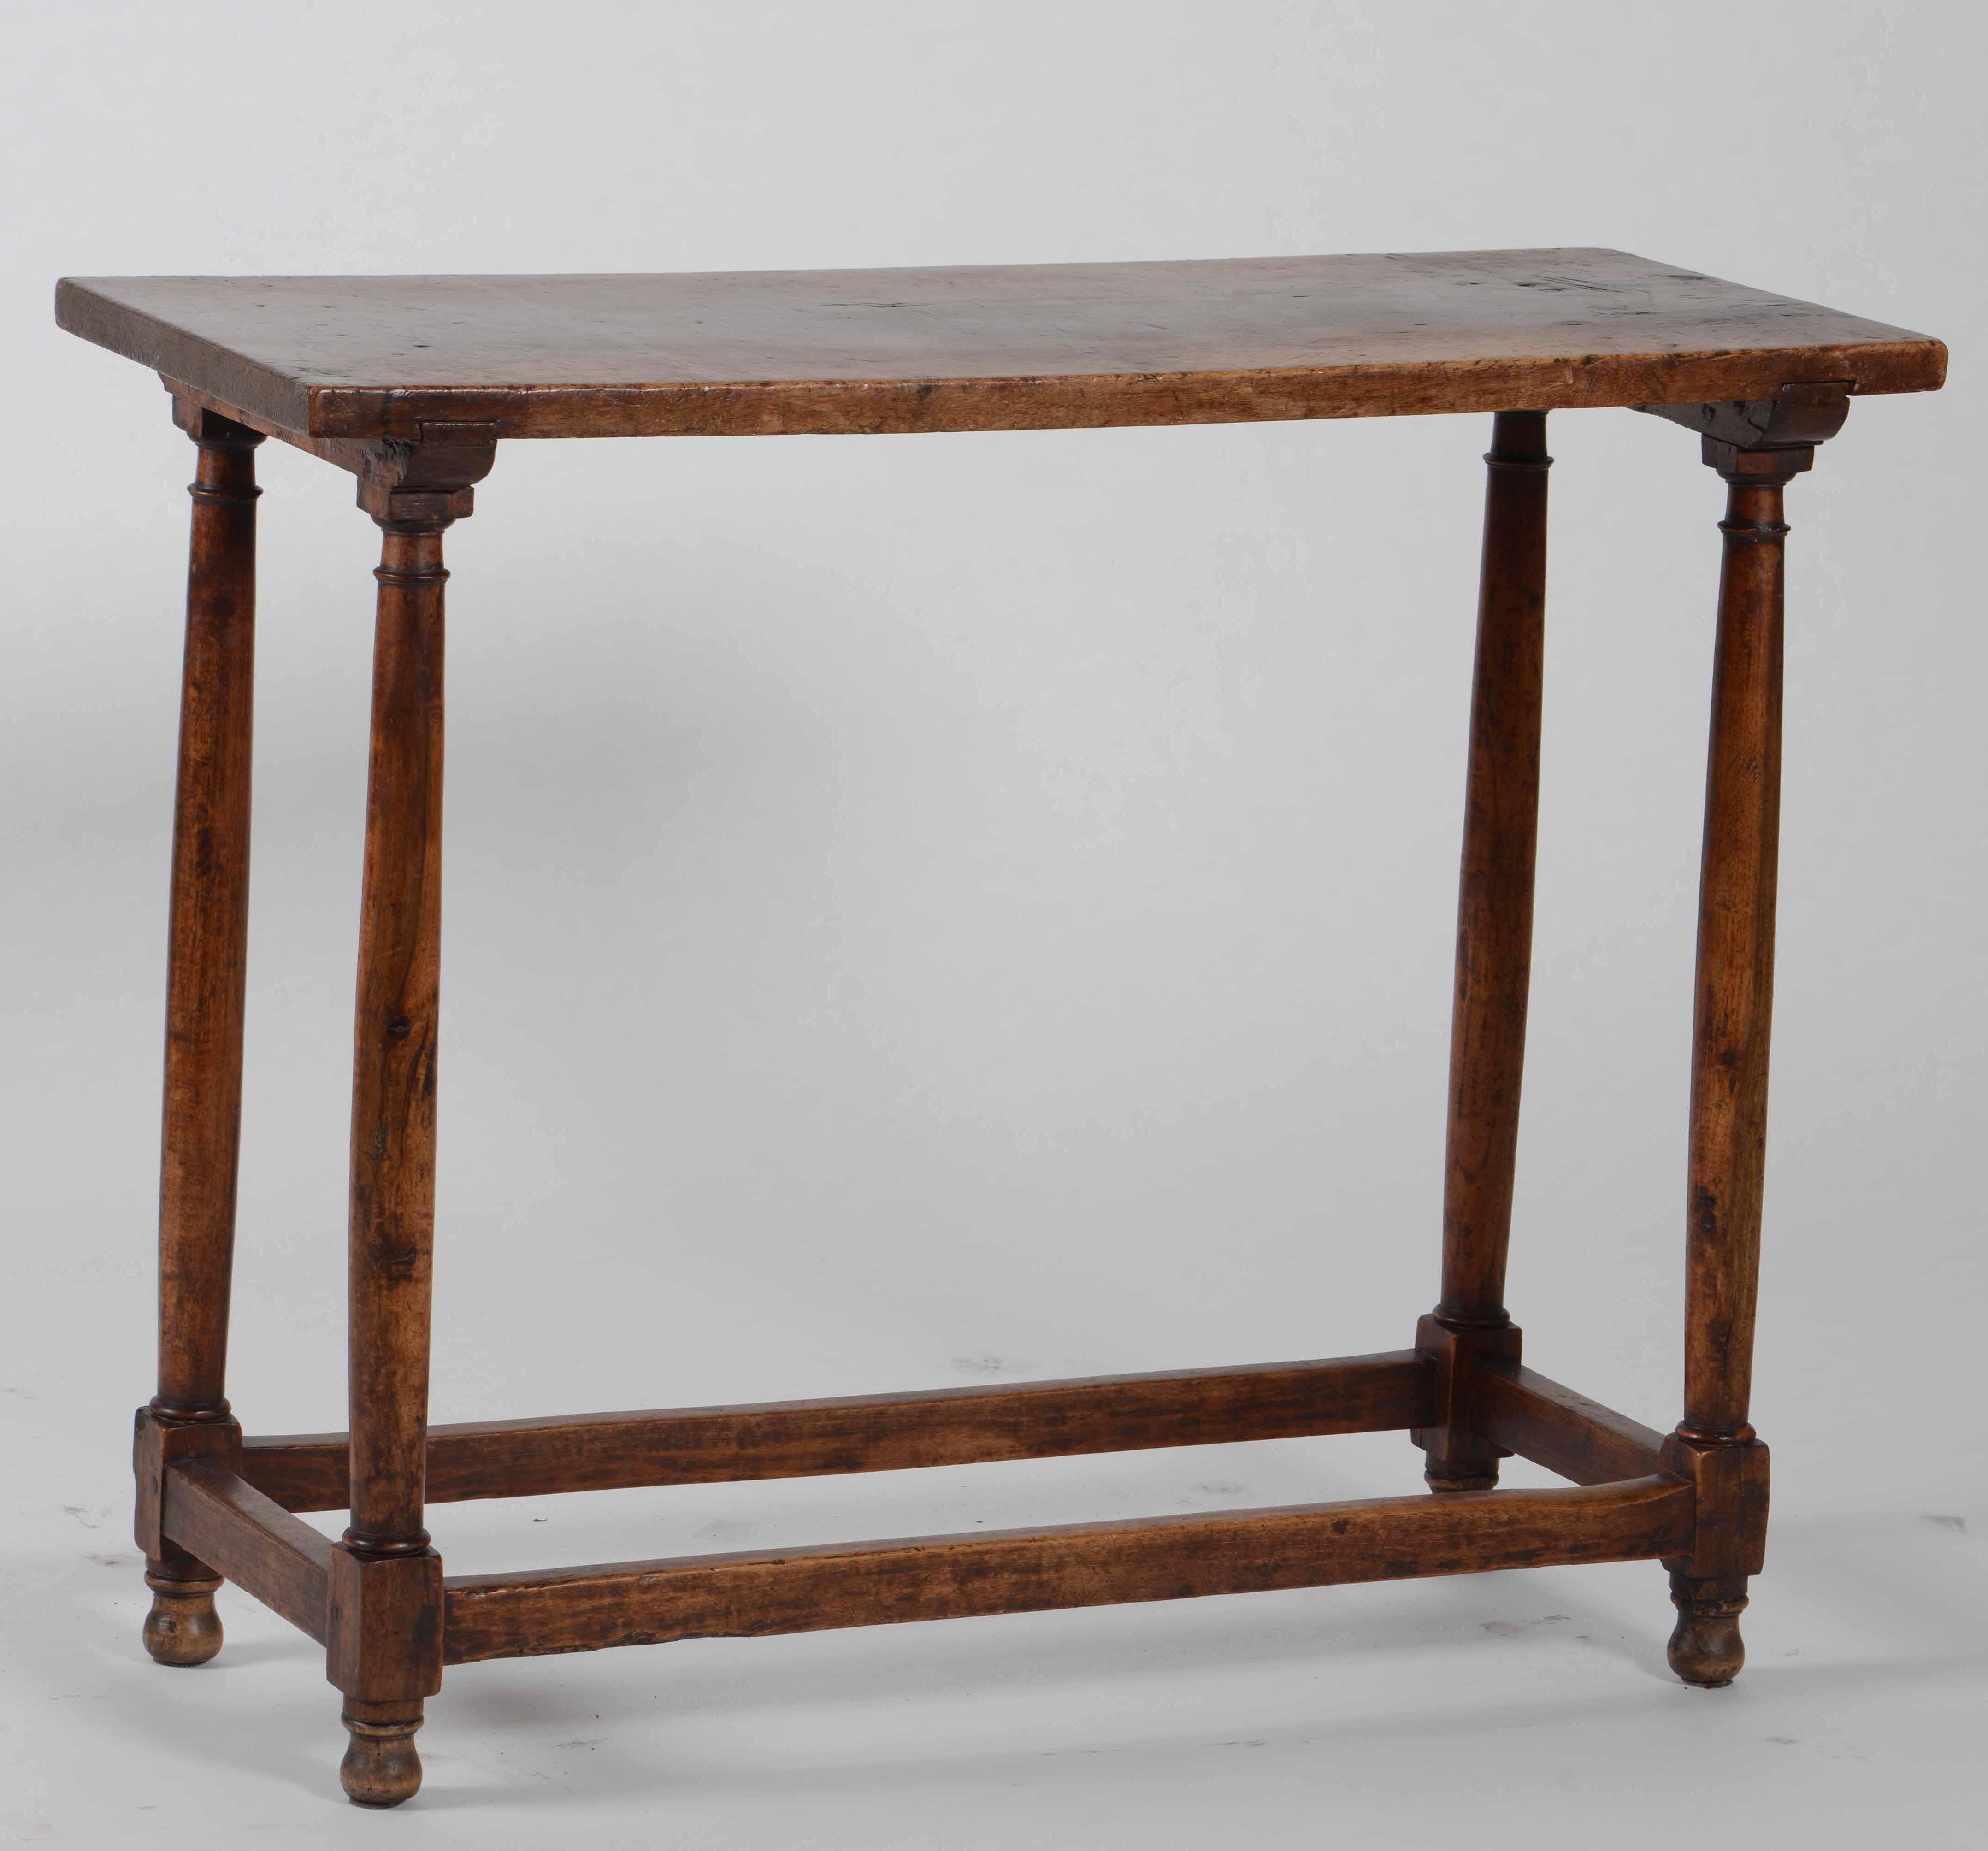 A very elegant small console table in walnut . Beautiful patina, works in a traditional or contemporary setting.